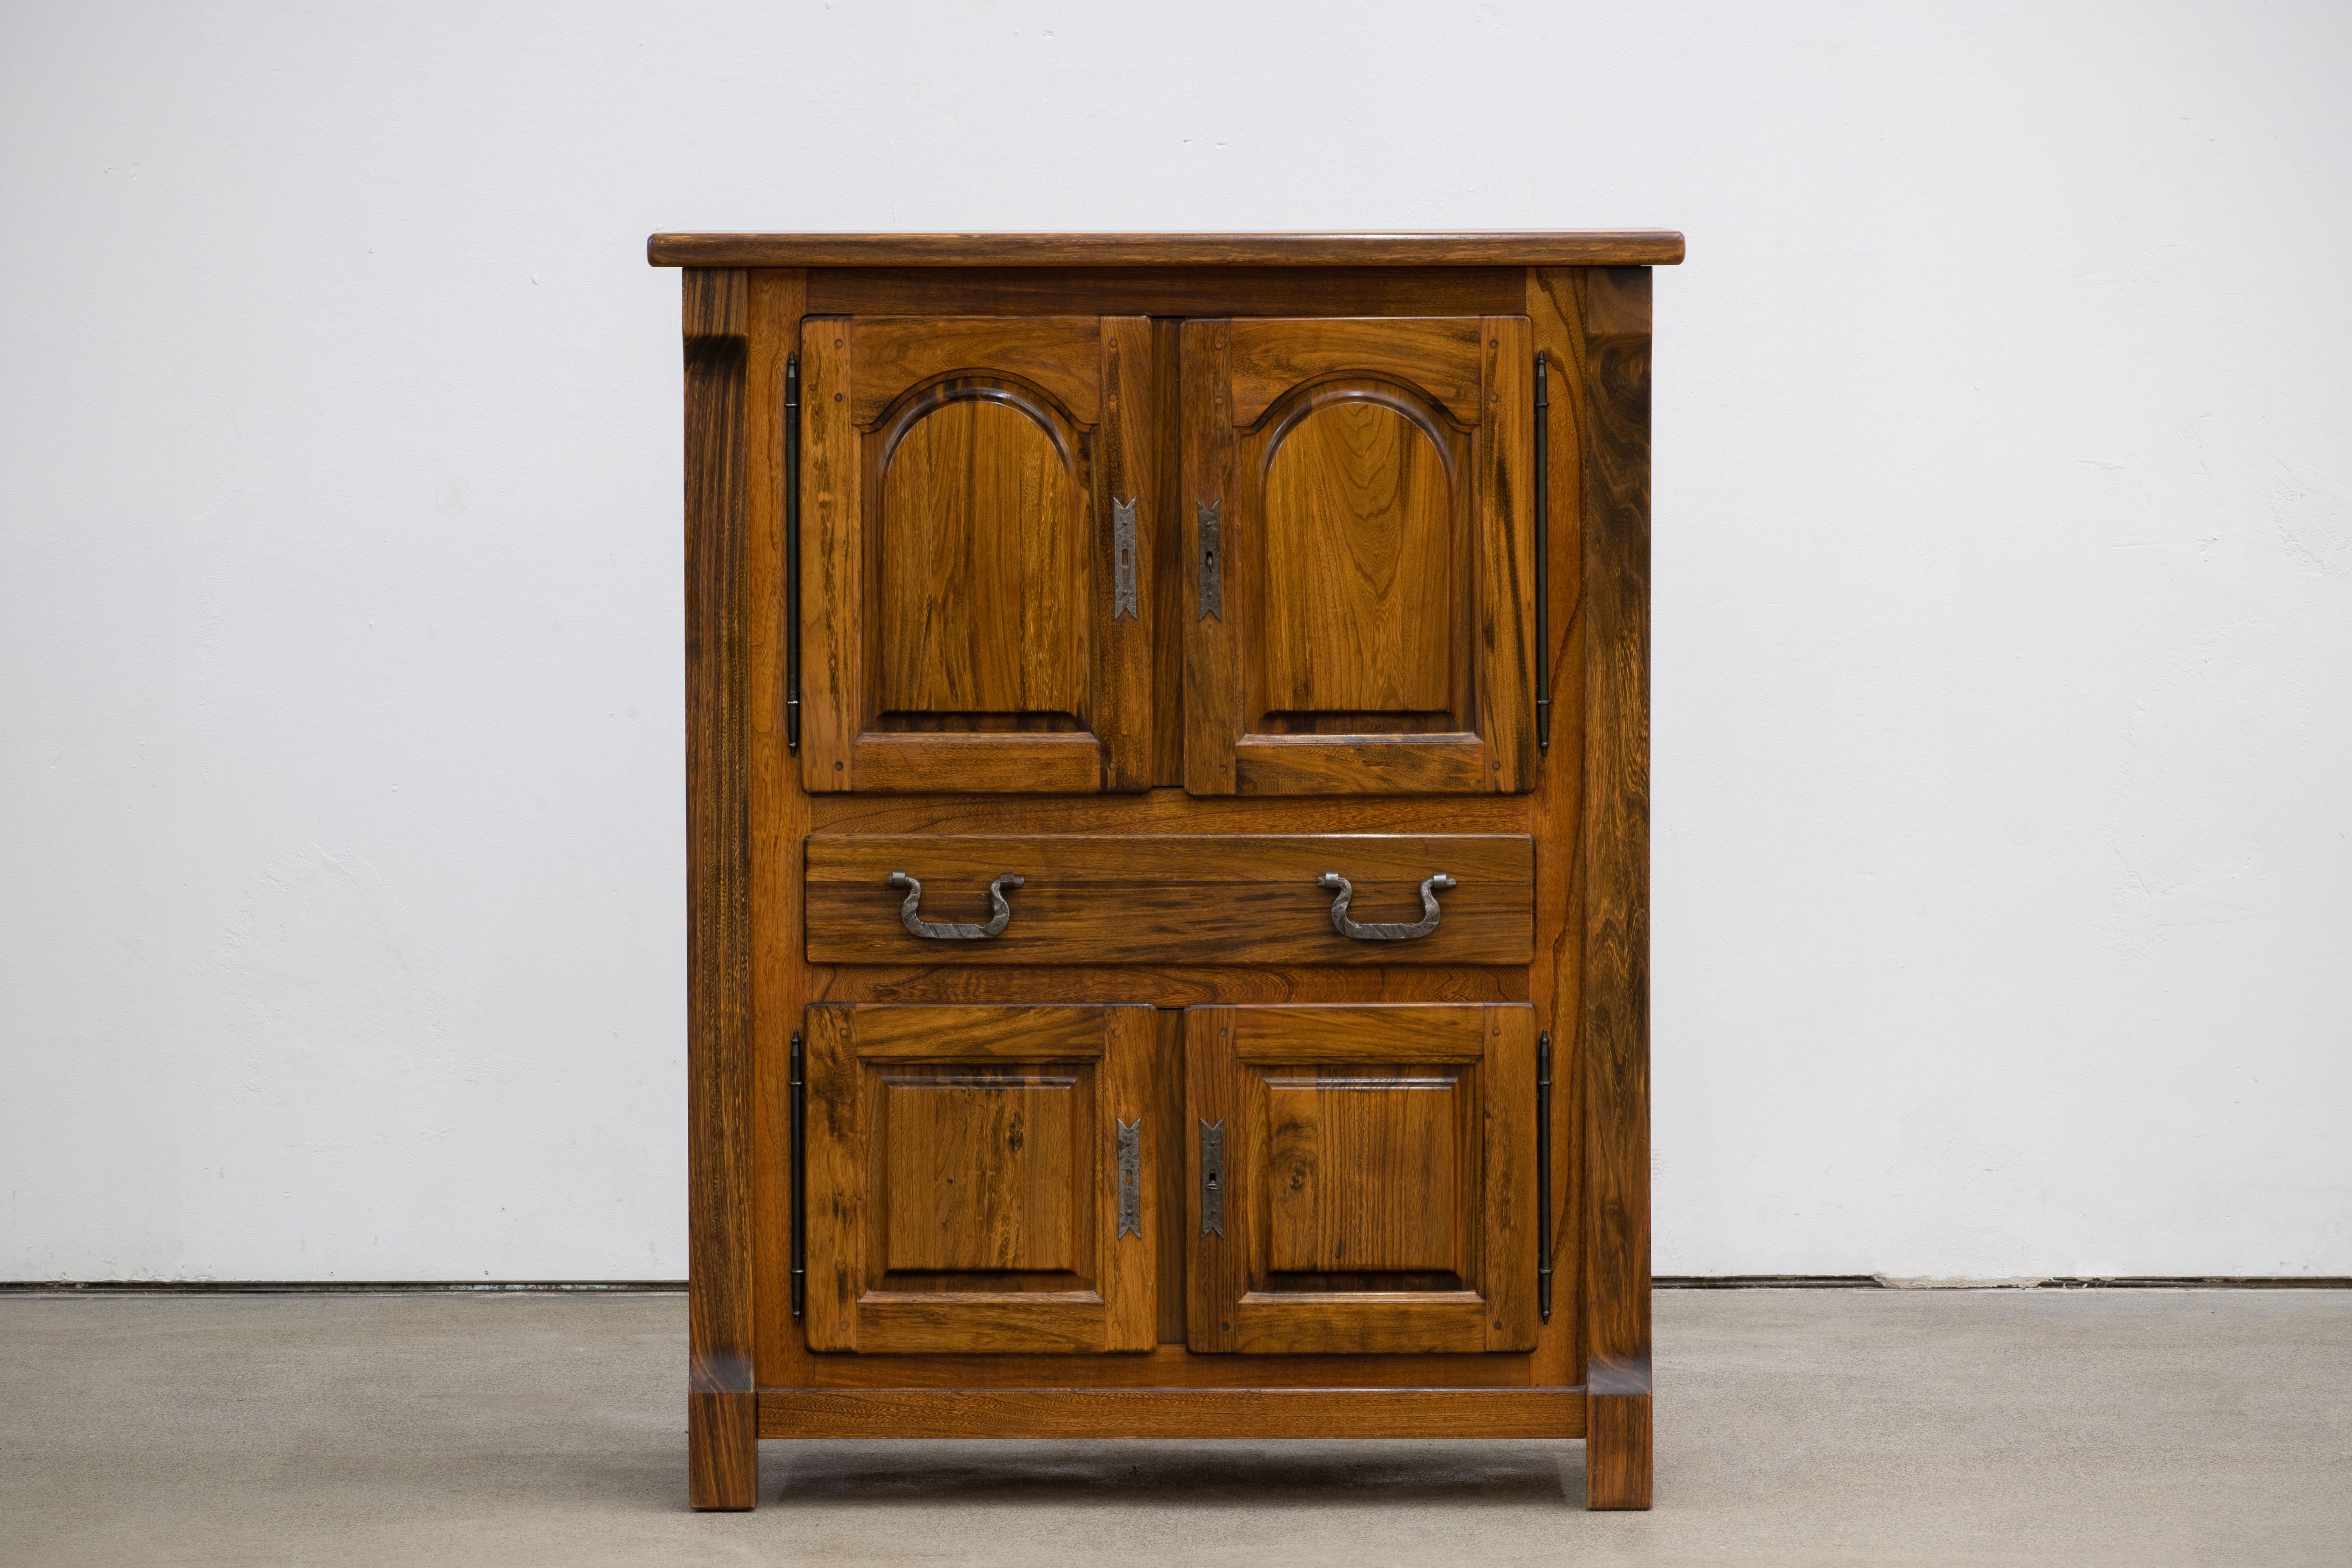 Brutalist solid elm cabinet, rustic. The buffet features stunning elm structure on door panels. It offers ample storage, with a swiveling plate behind the upper doors. A unique blend of Rustic and Brutalist Modern design. The cabinet is in excellent